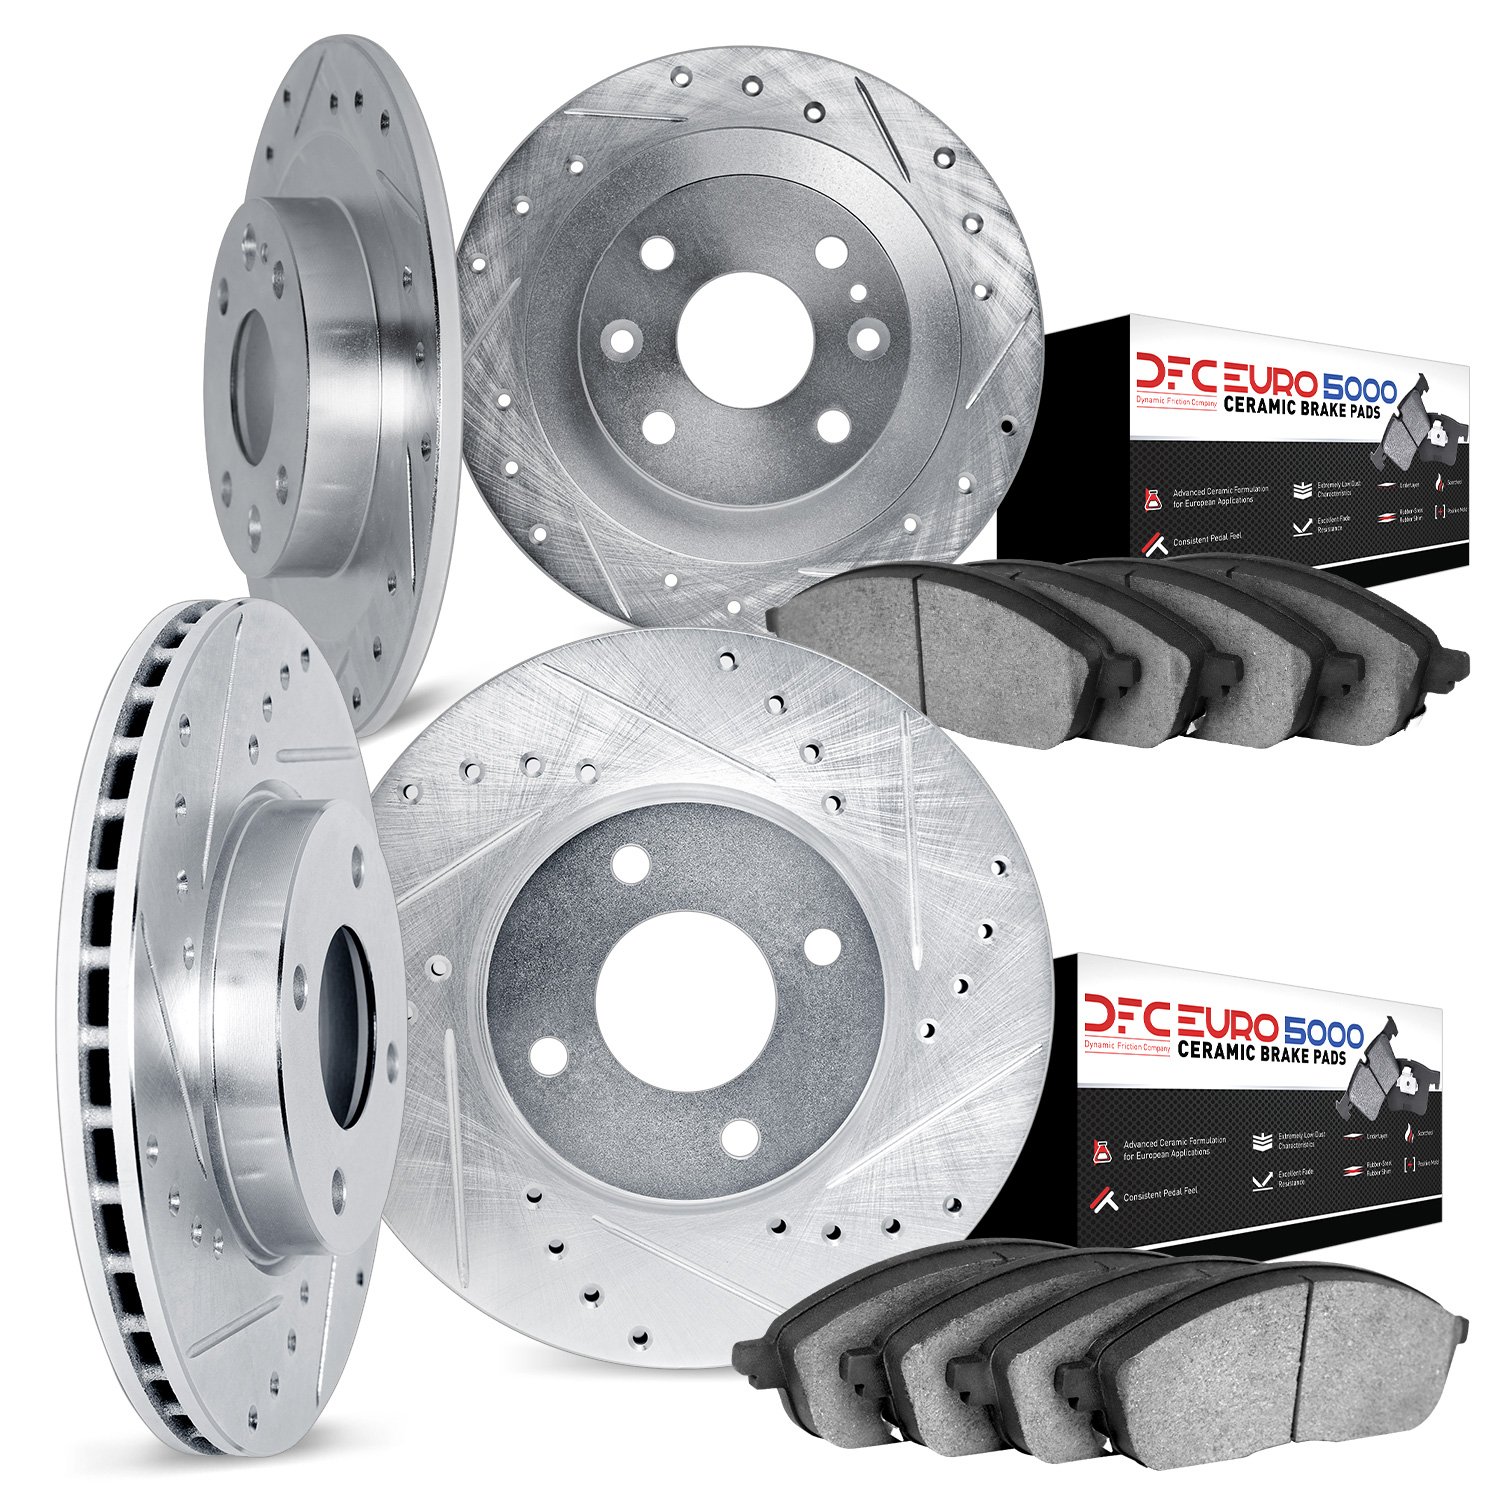 7604-07000 Drilled/Slotted Brake Rotors w/5000 Euro Ceramic Brake Pads Kit [Silver], 2012-2019 Mopar, Position: Front and Rear